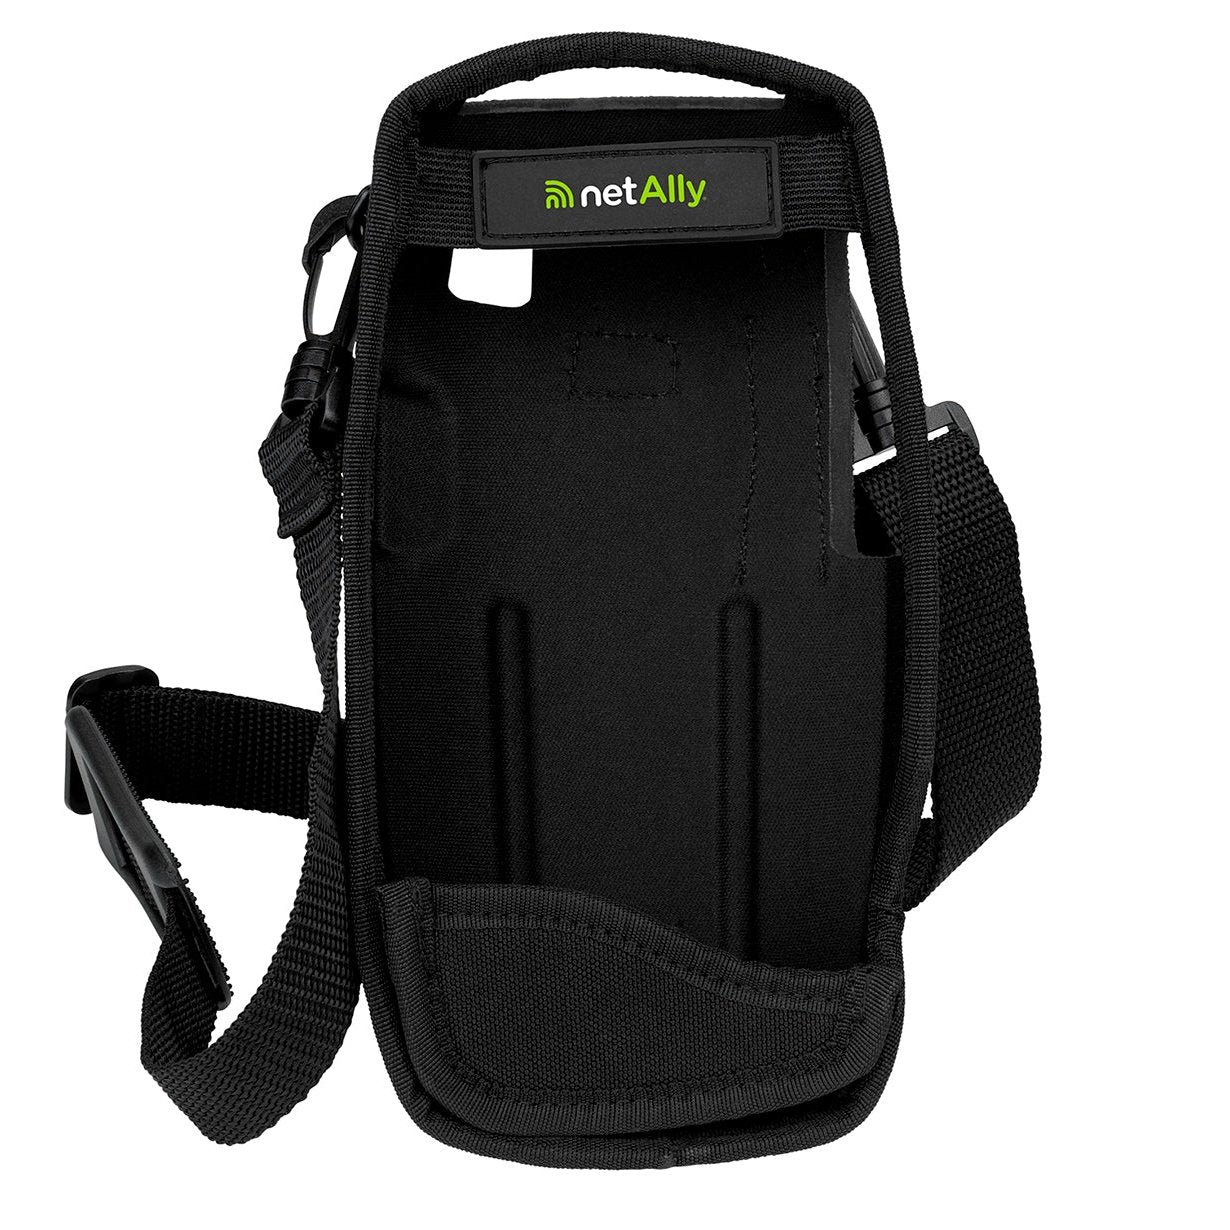 Idbf121b7c404cd3fee48ca1eb9c9161a94c2cdd9 NetAlly Protective Carrying Holster with shoulder strap for use with LinkRunner G2, Aircheck G2 TEST